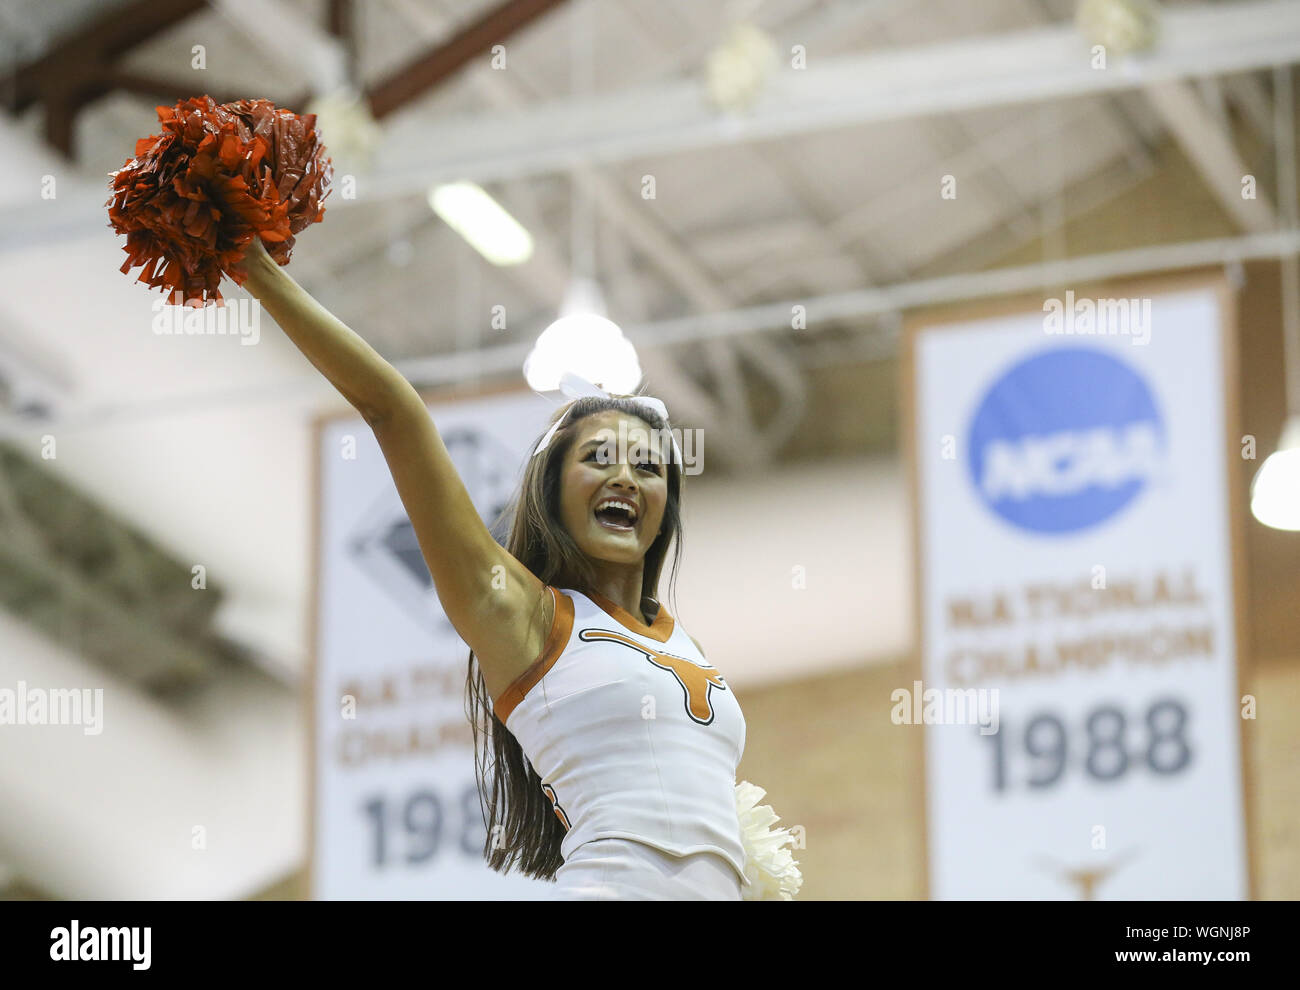 Austin, TX, USA. 1st Sep, 2019. A Texas Longhorns cheerleader during an NCAA volleyball match between the University of Texas and the University of Southern California at Gregory Gymnasium in Austin, Texas on September 1, 2019. Credit: Scott Coleman/ZUMA Wire/Alamy Live News Stock Photo